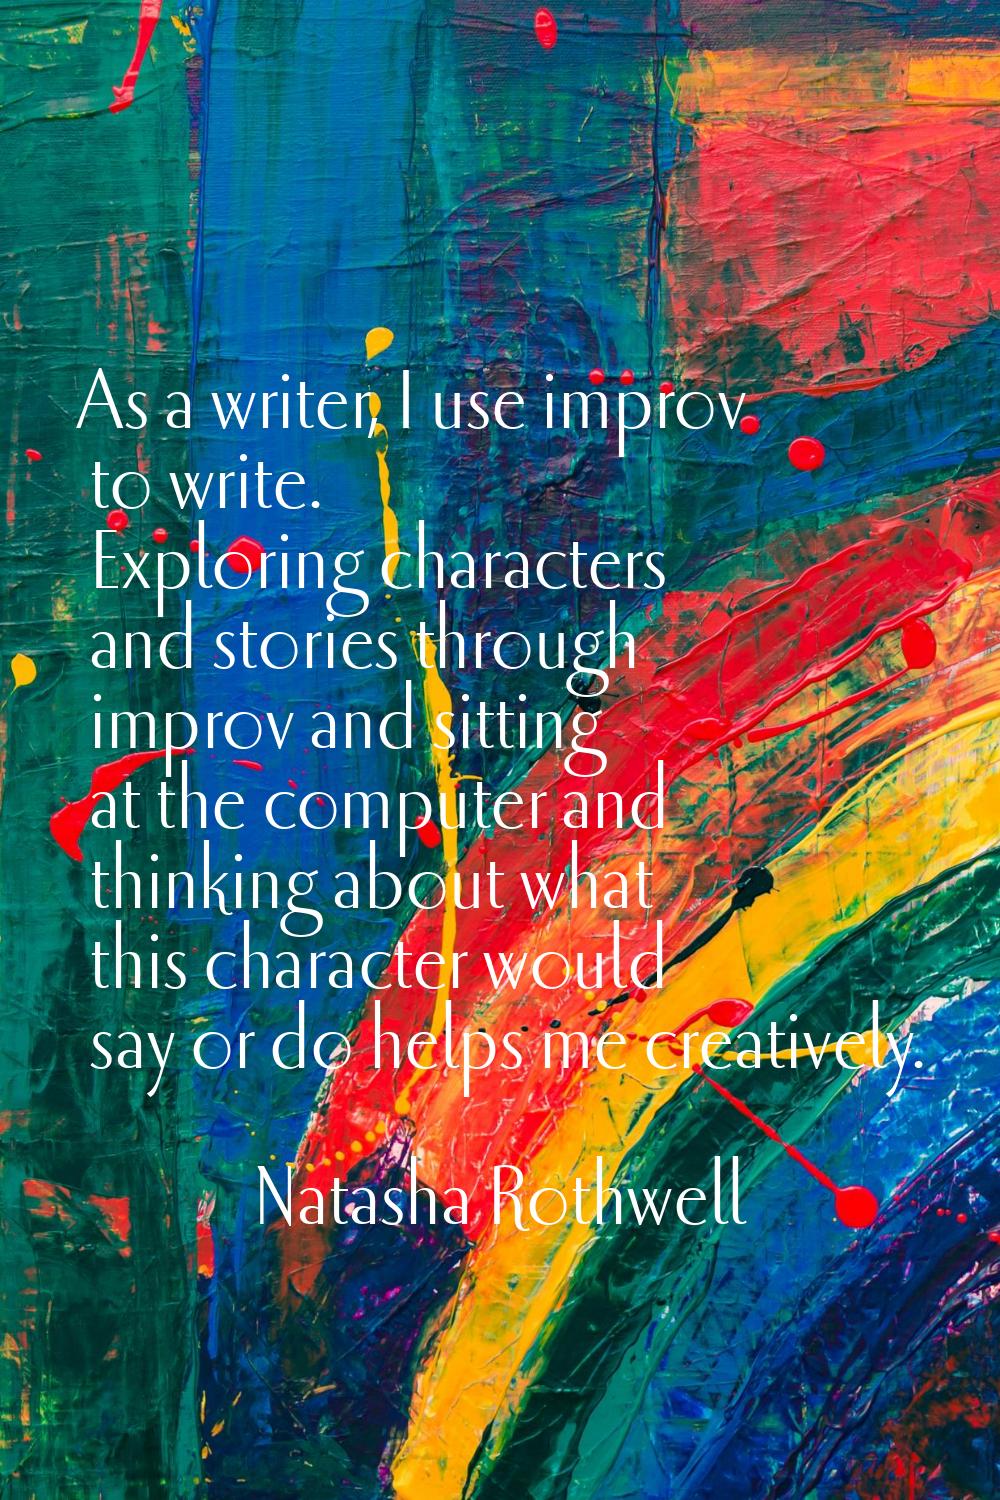 As a writer, I use improv to write. Exploring characters and stories through improv and sitting at 